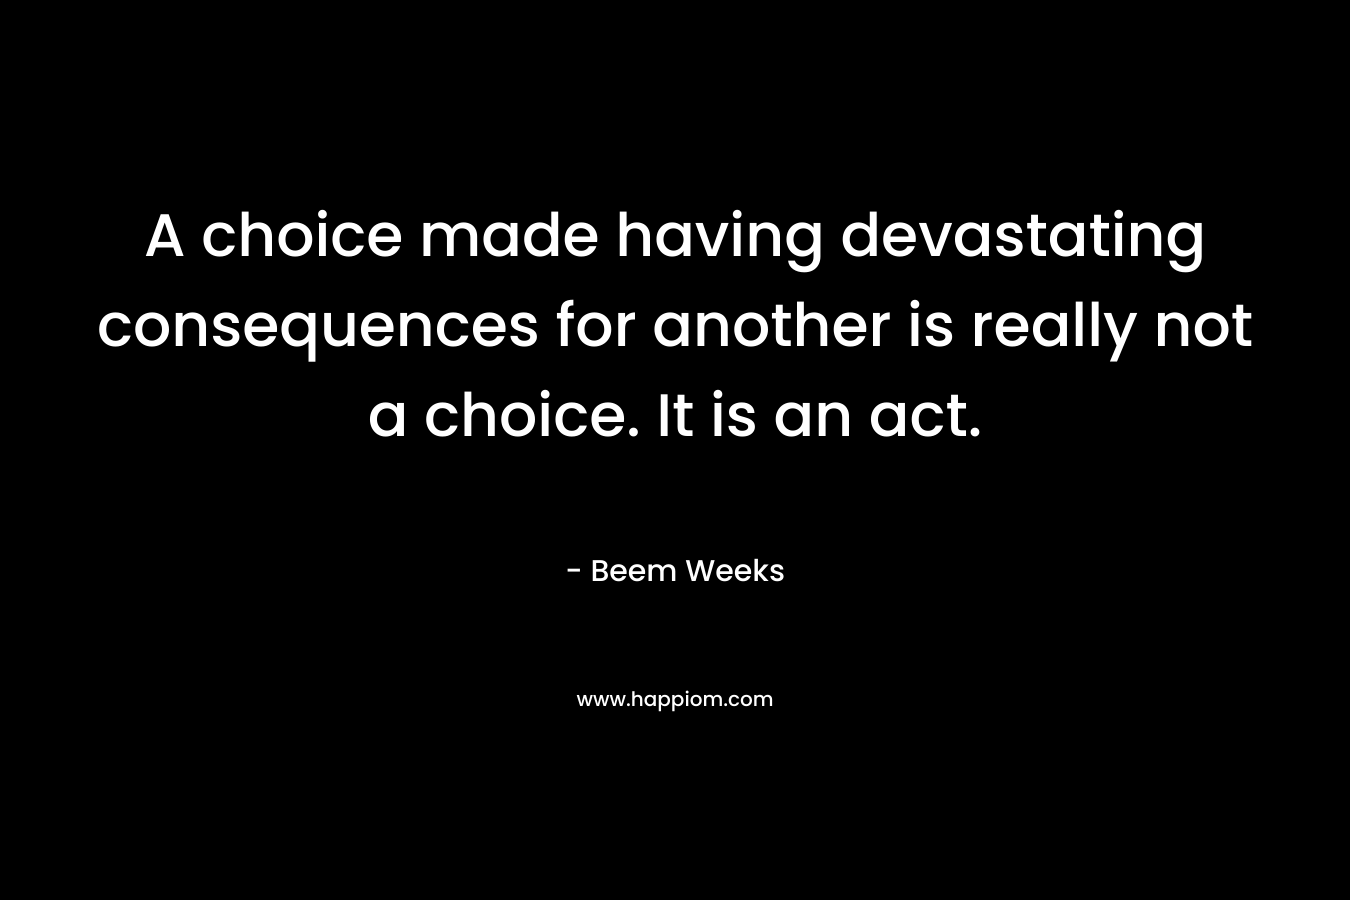 A choice made having devastating consequences for another is really not a choice. It is an act. – Beem Weeks